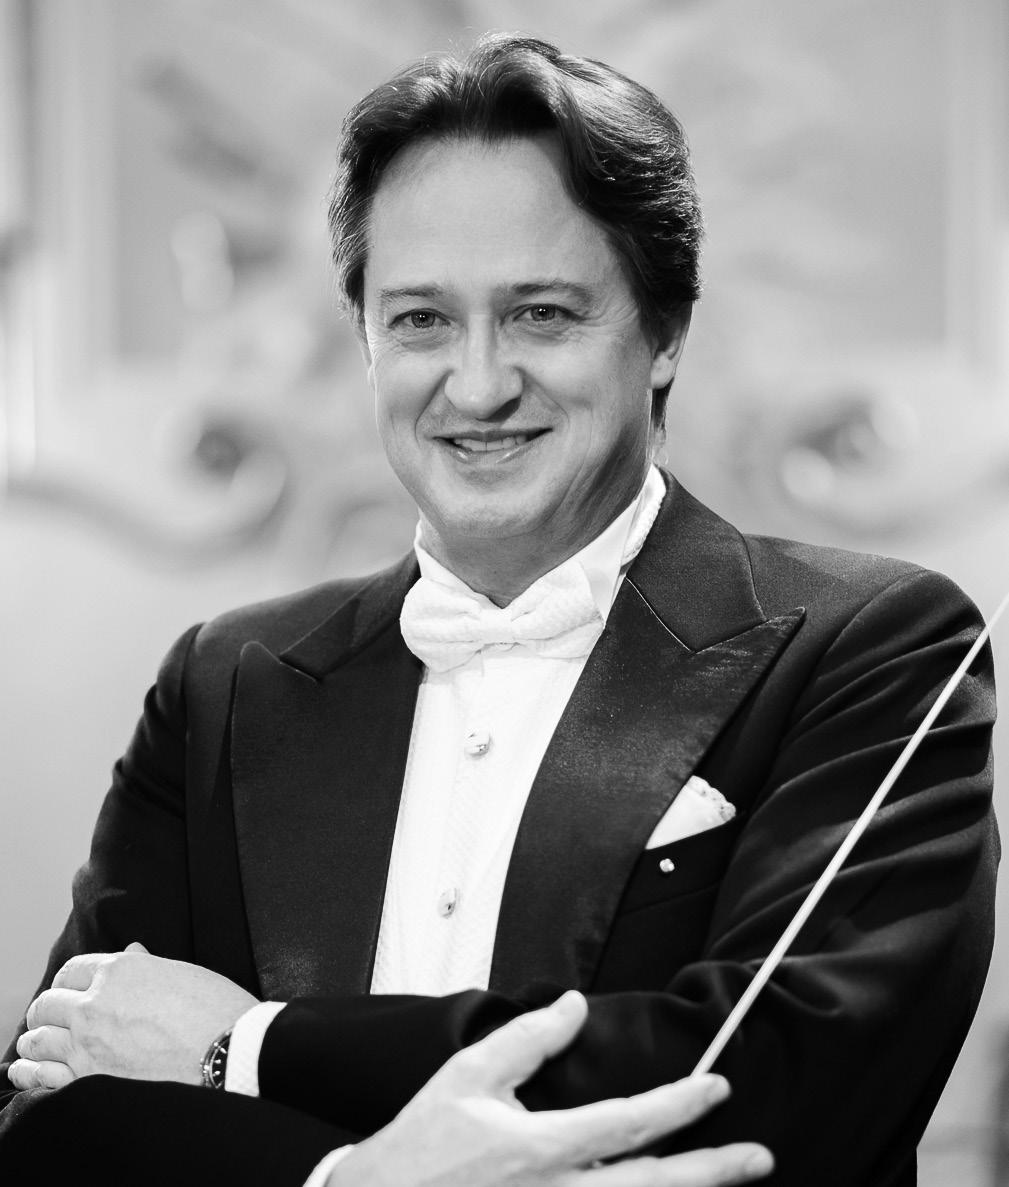 About the Artists András Deák, Conductor (Budapest) András Deák attended the Liszt Academy of Music where he received diplomas in both choral and orchestral conducting.